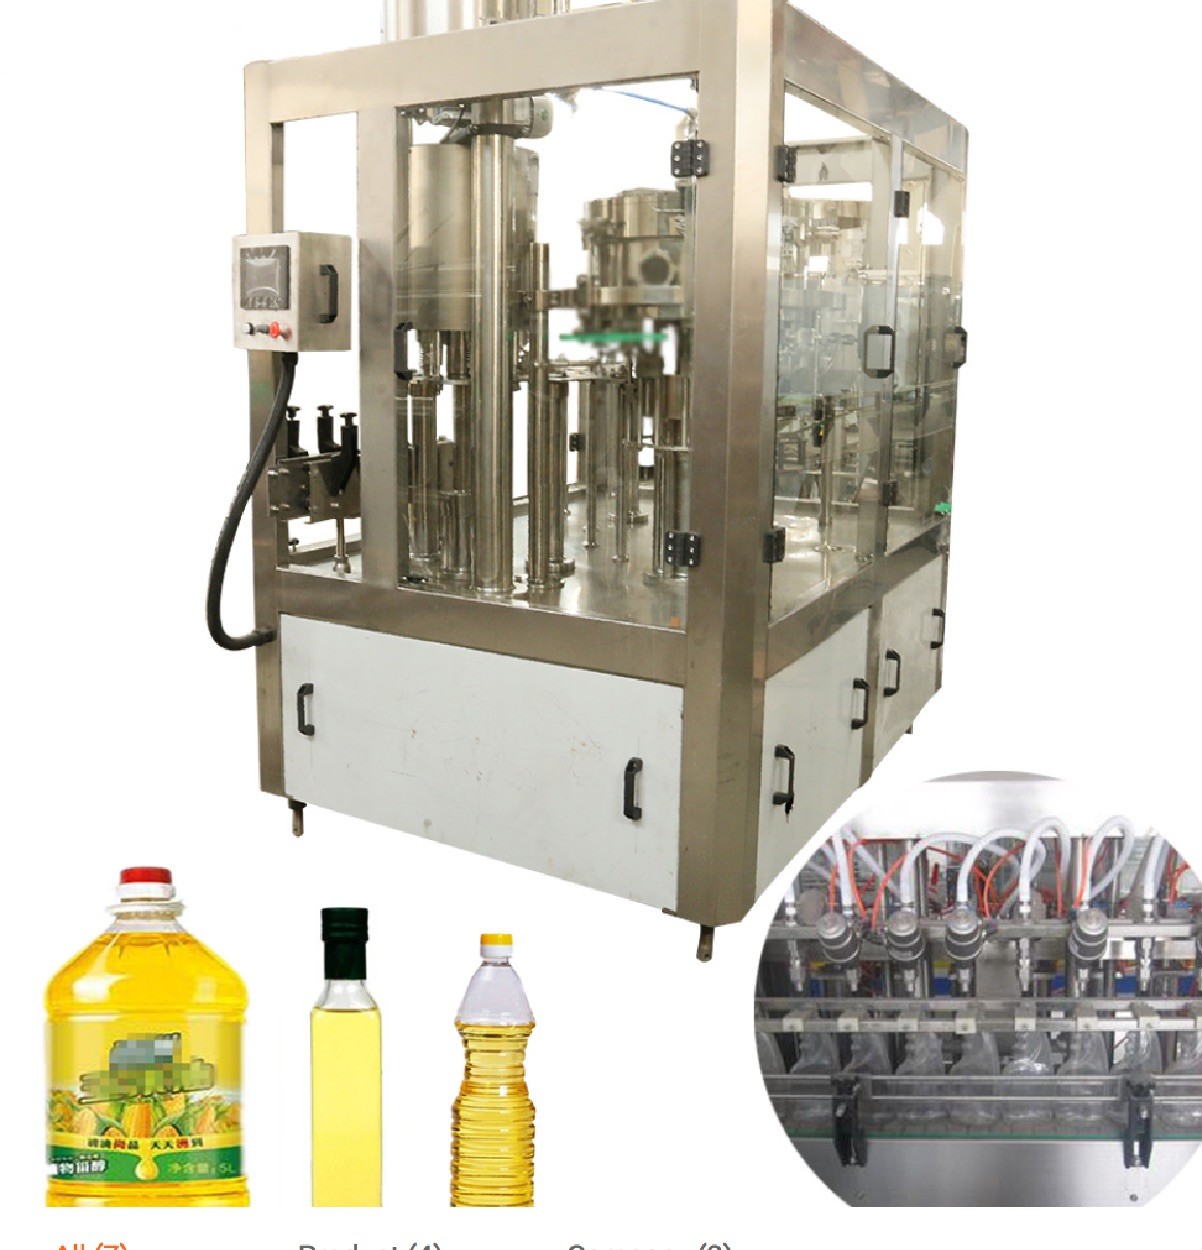 china automatical cellophane overwrapping machine model dts 